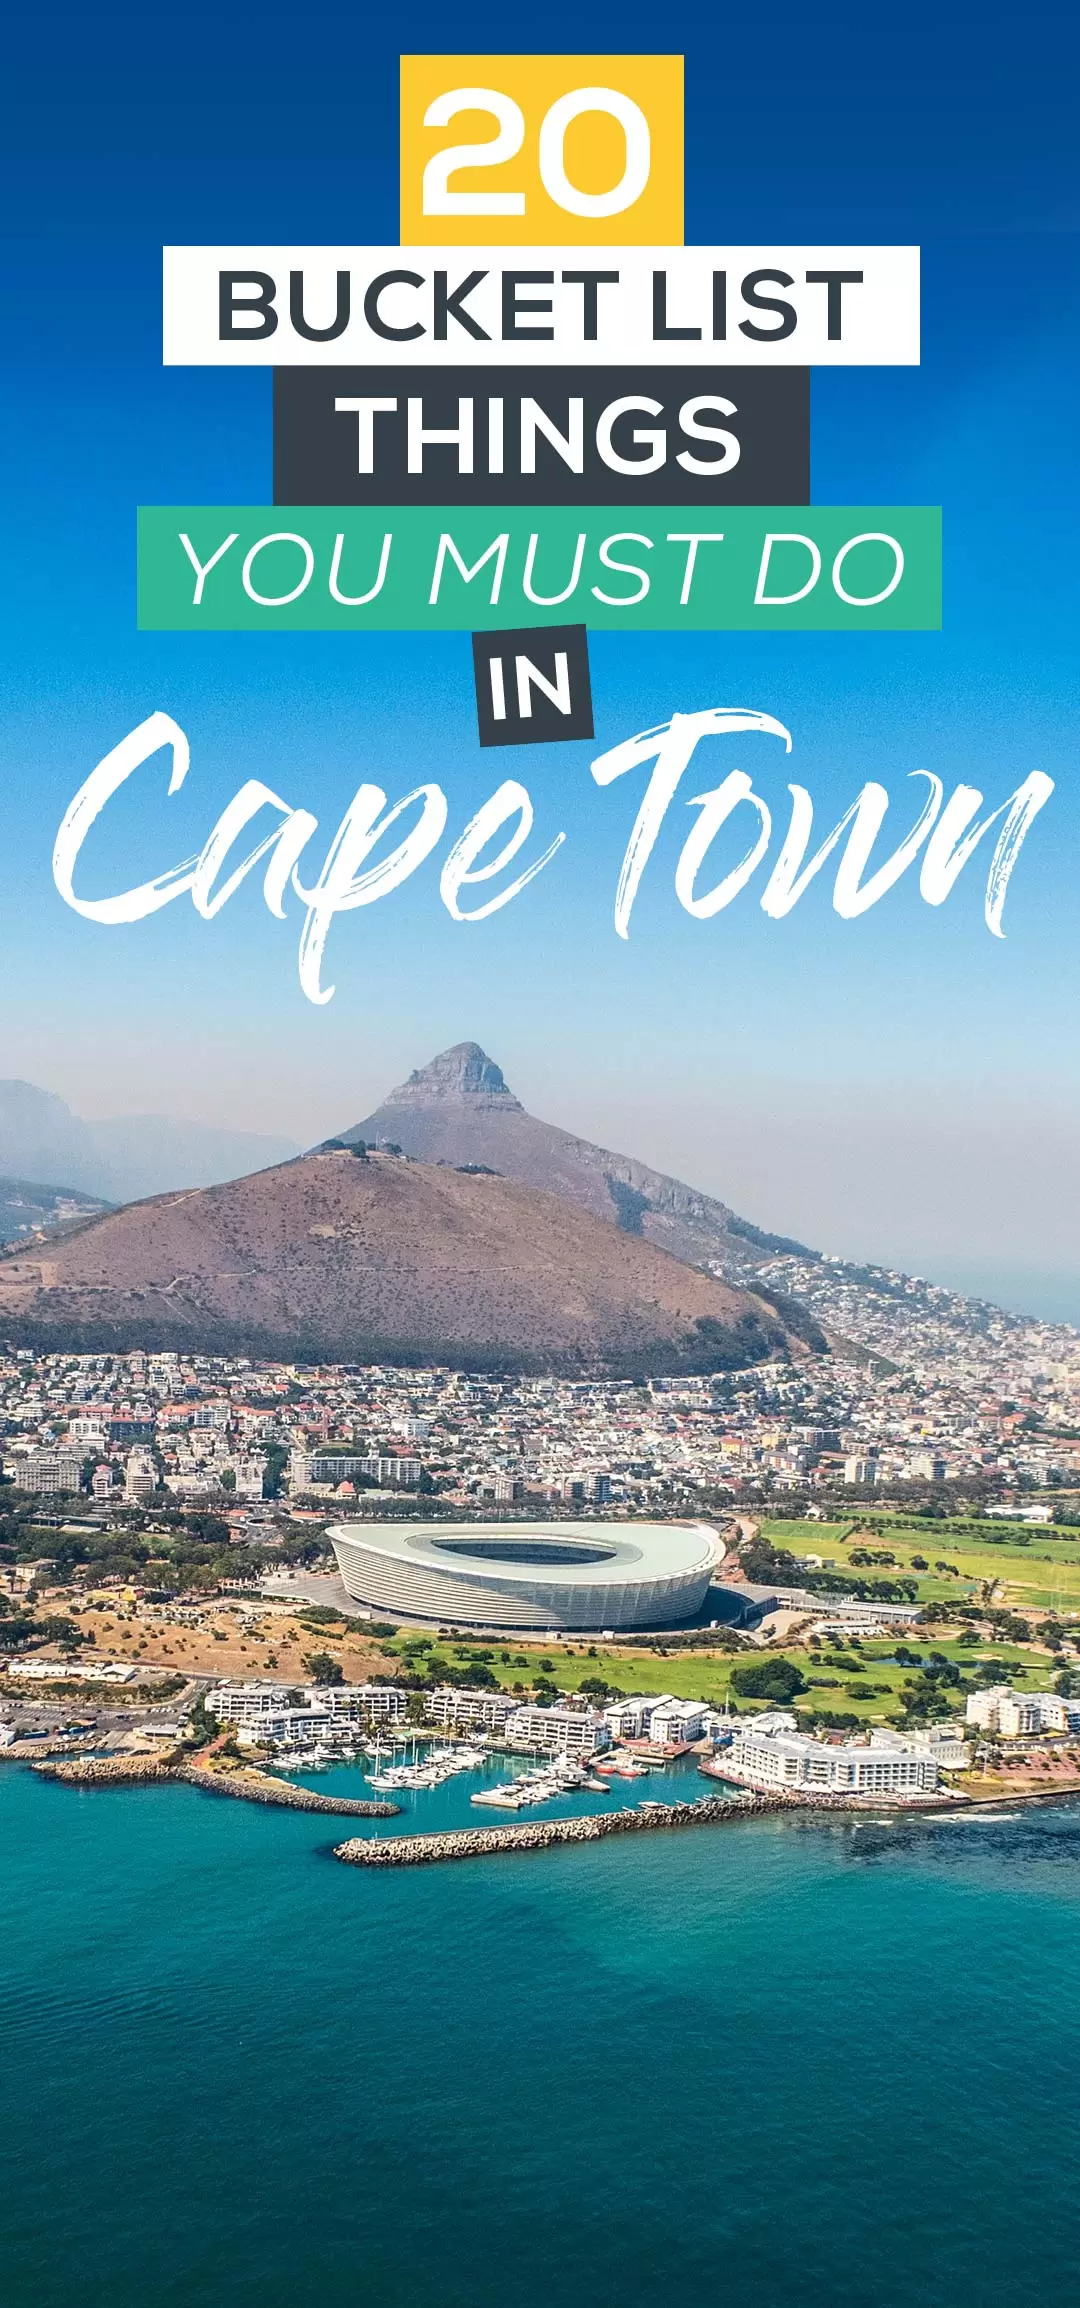 things you must do in cape town south africa